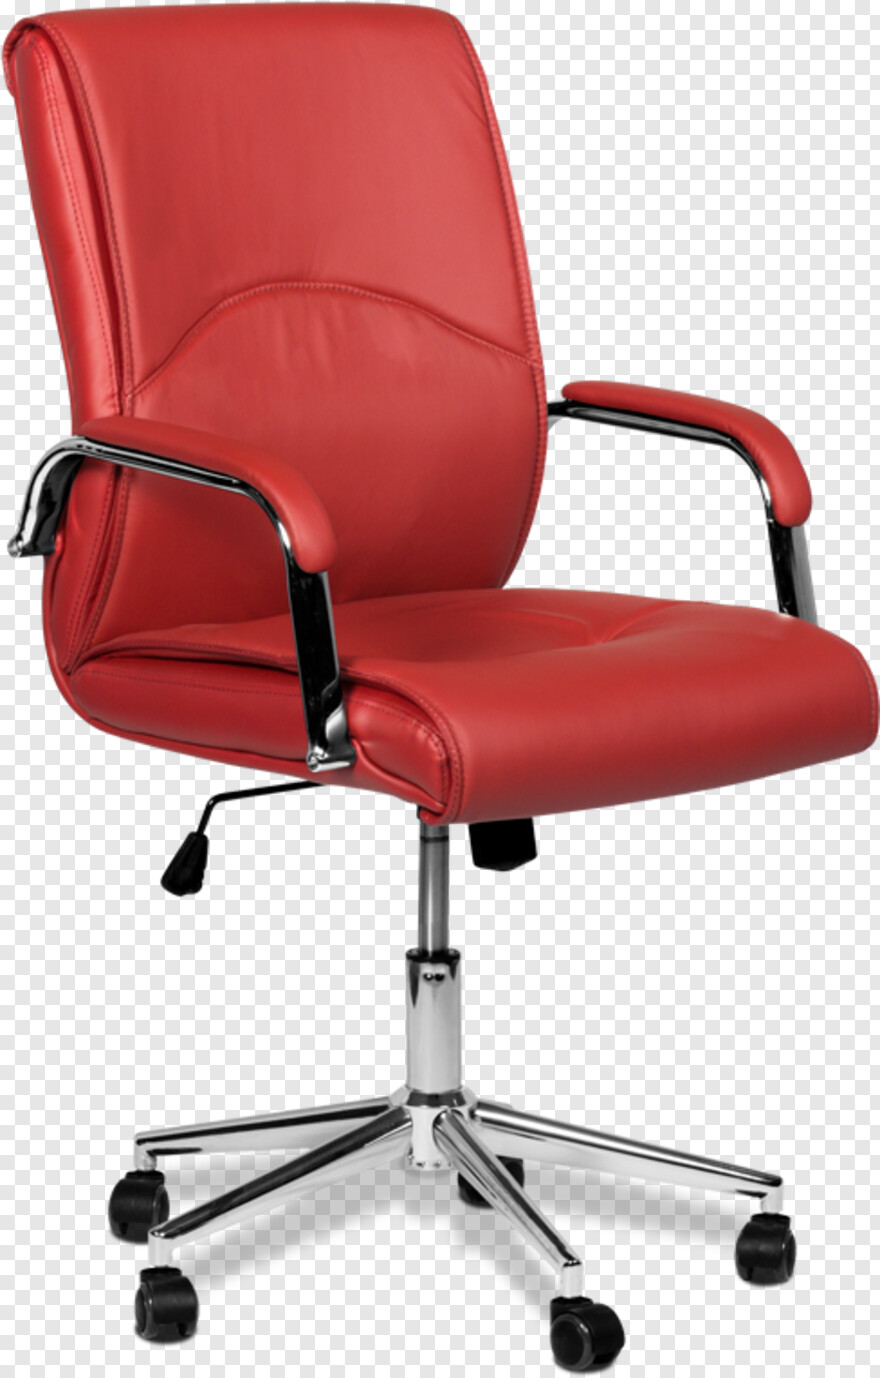 office-chair # 451932